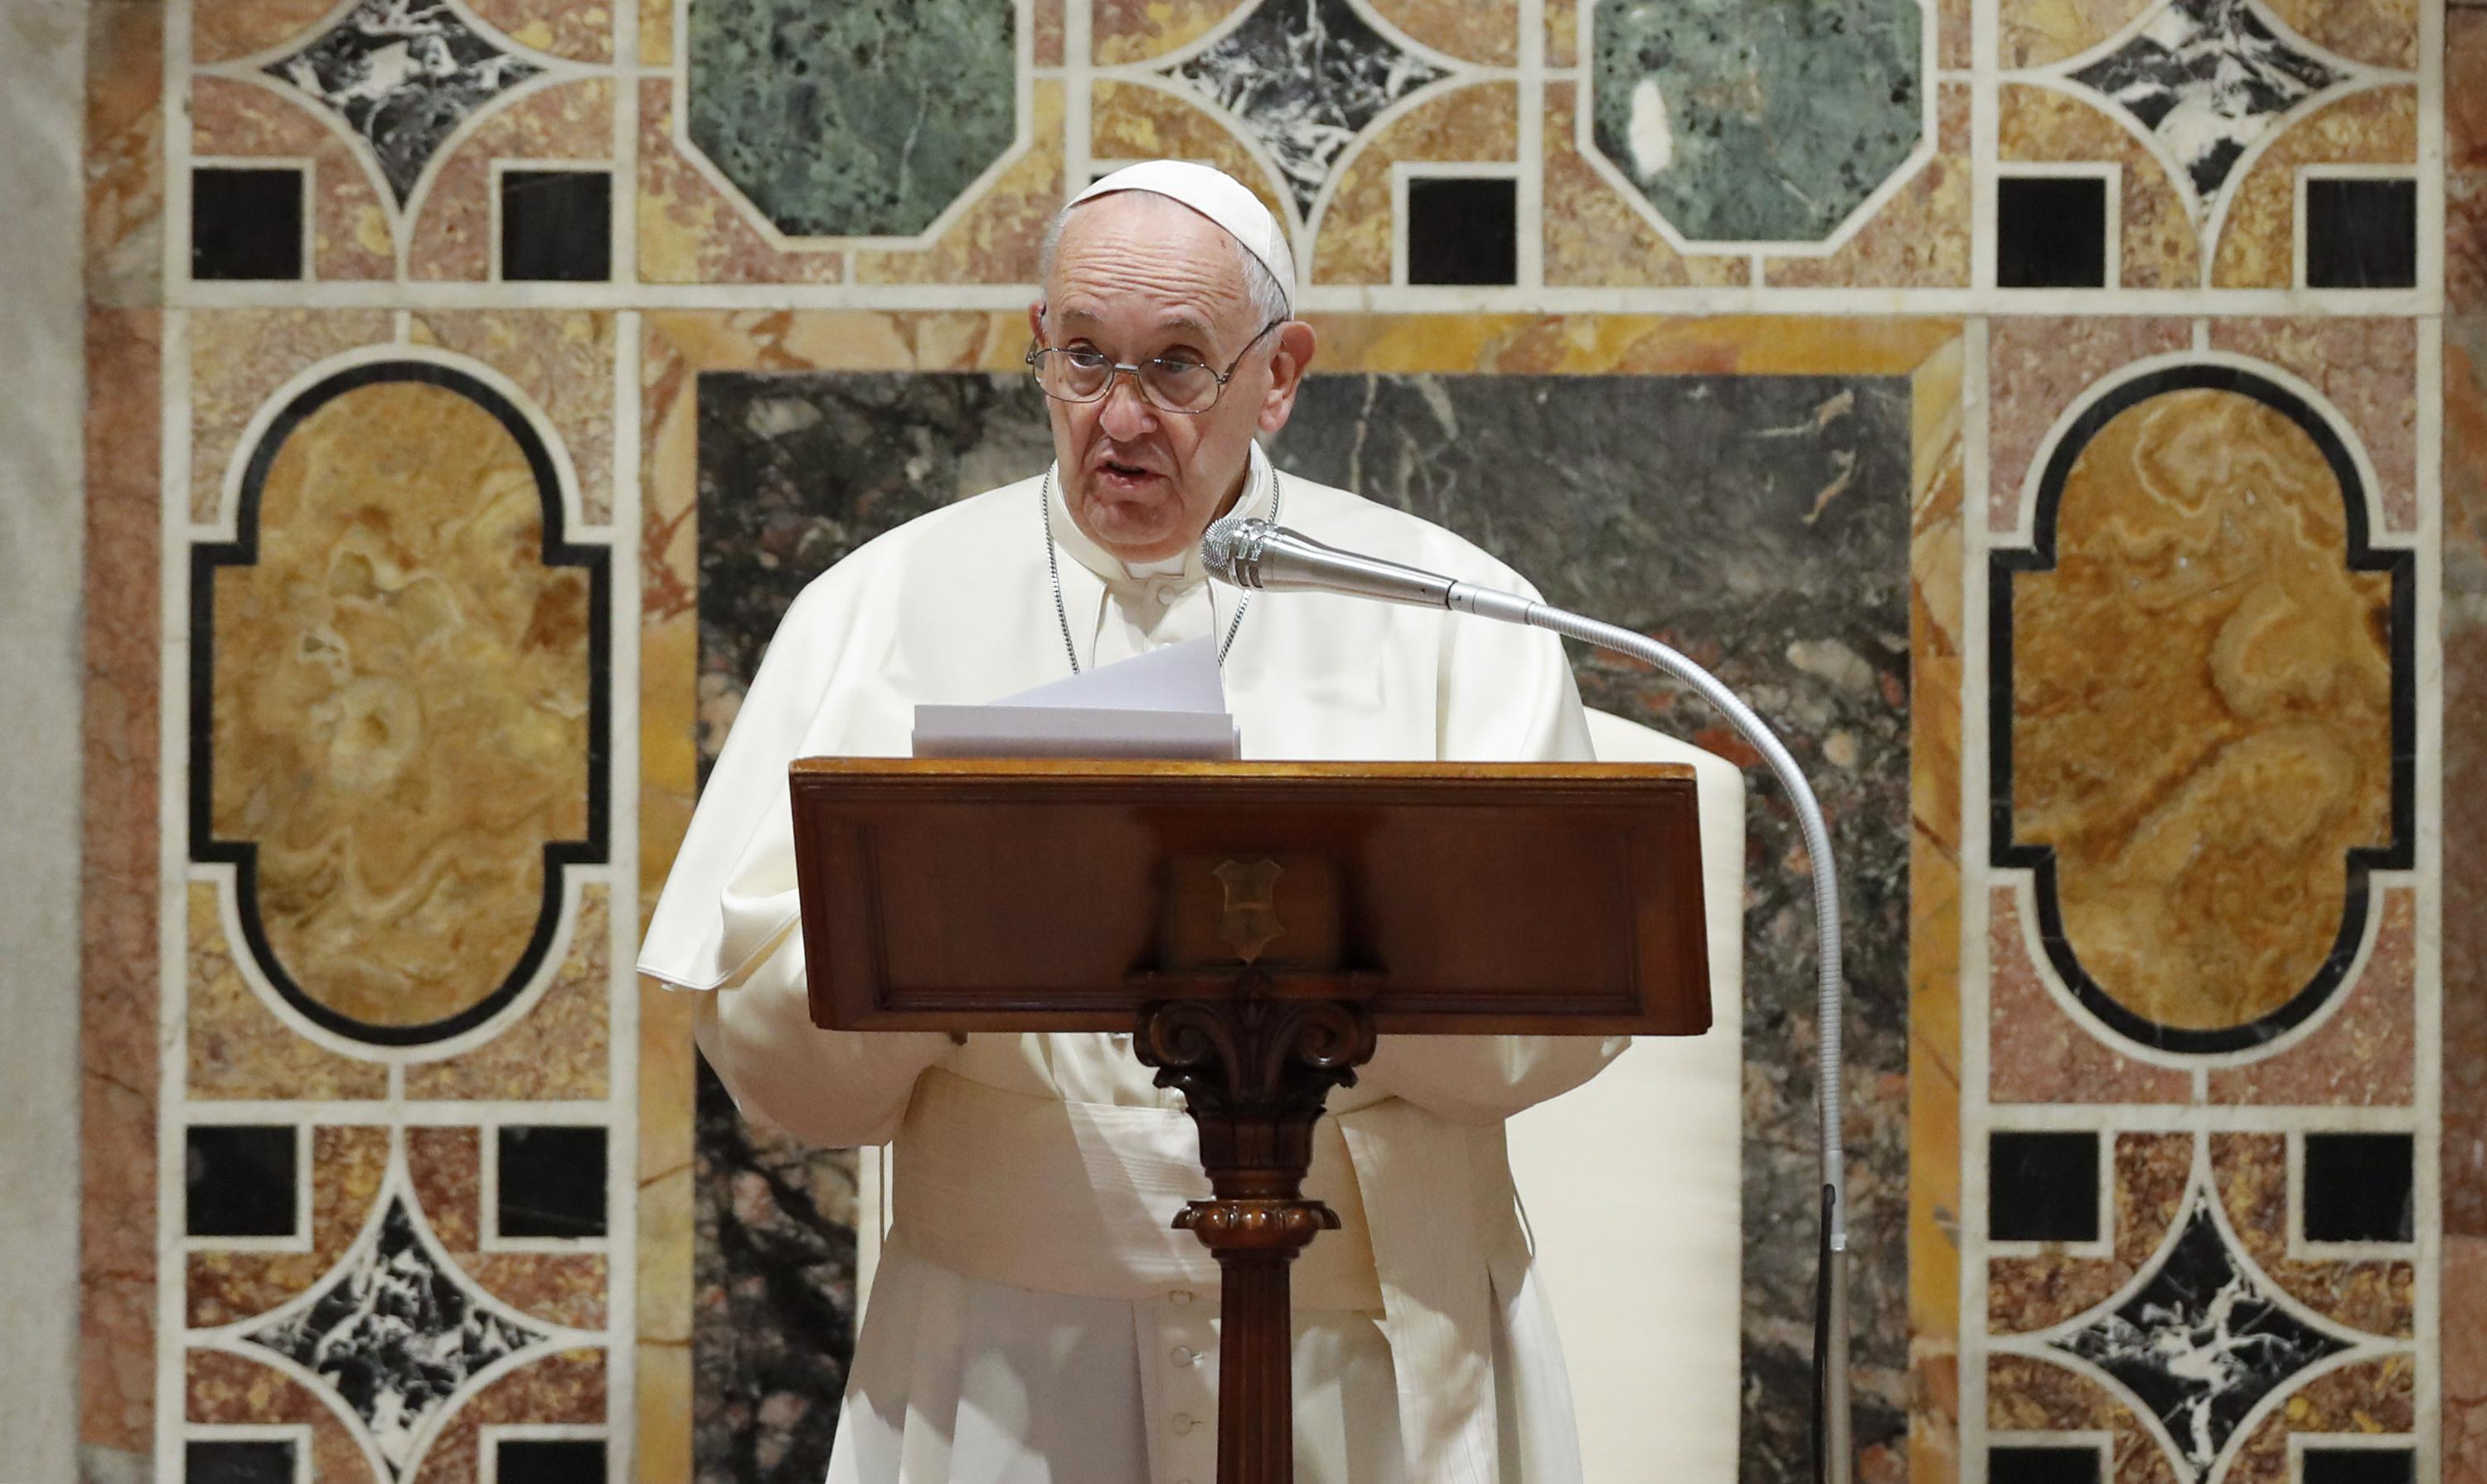 Pope warns of risks from US-Iran tensions in policy speech - The Associated Press